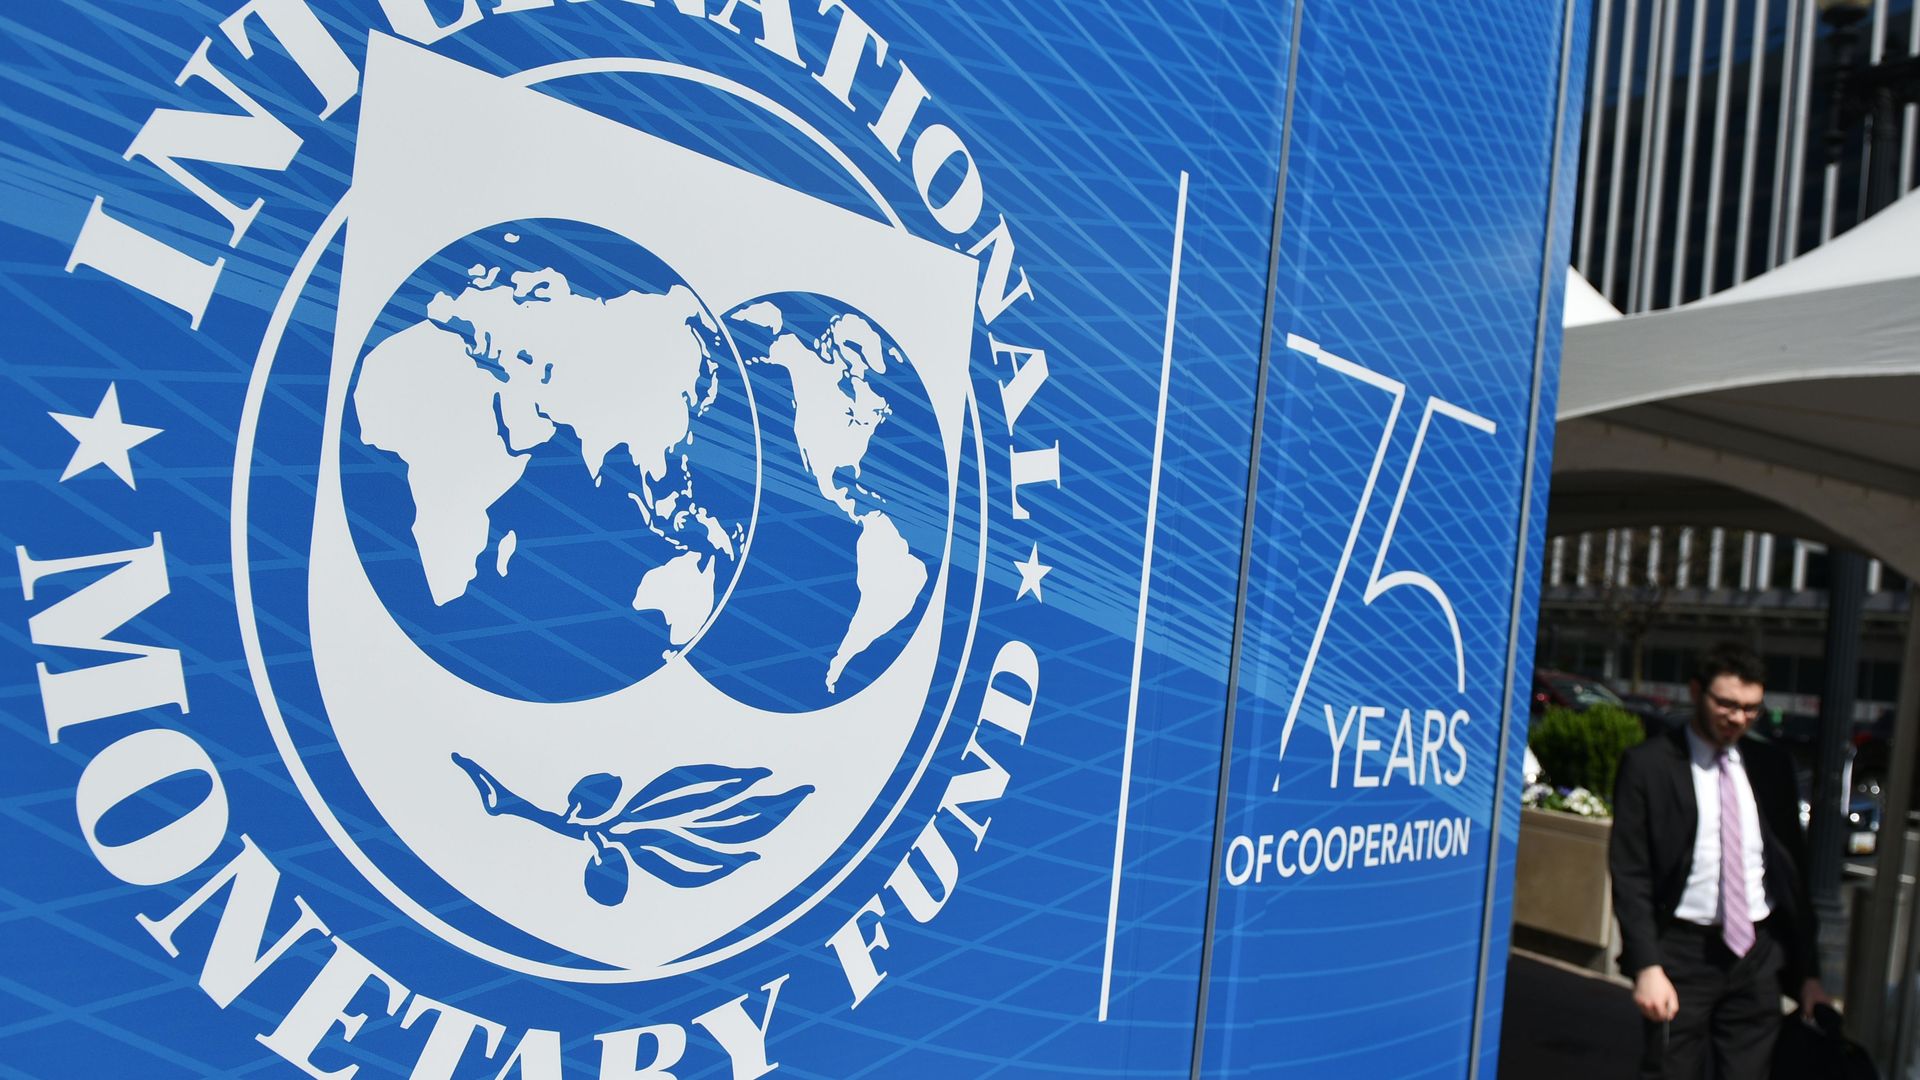 The seal of the International Monetary Fund(IMF) is seen outside of the headquarters building in Washington, DC on April 8, 2019.